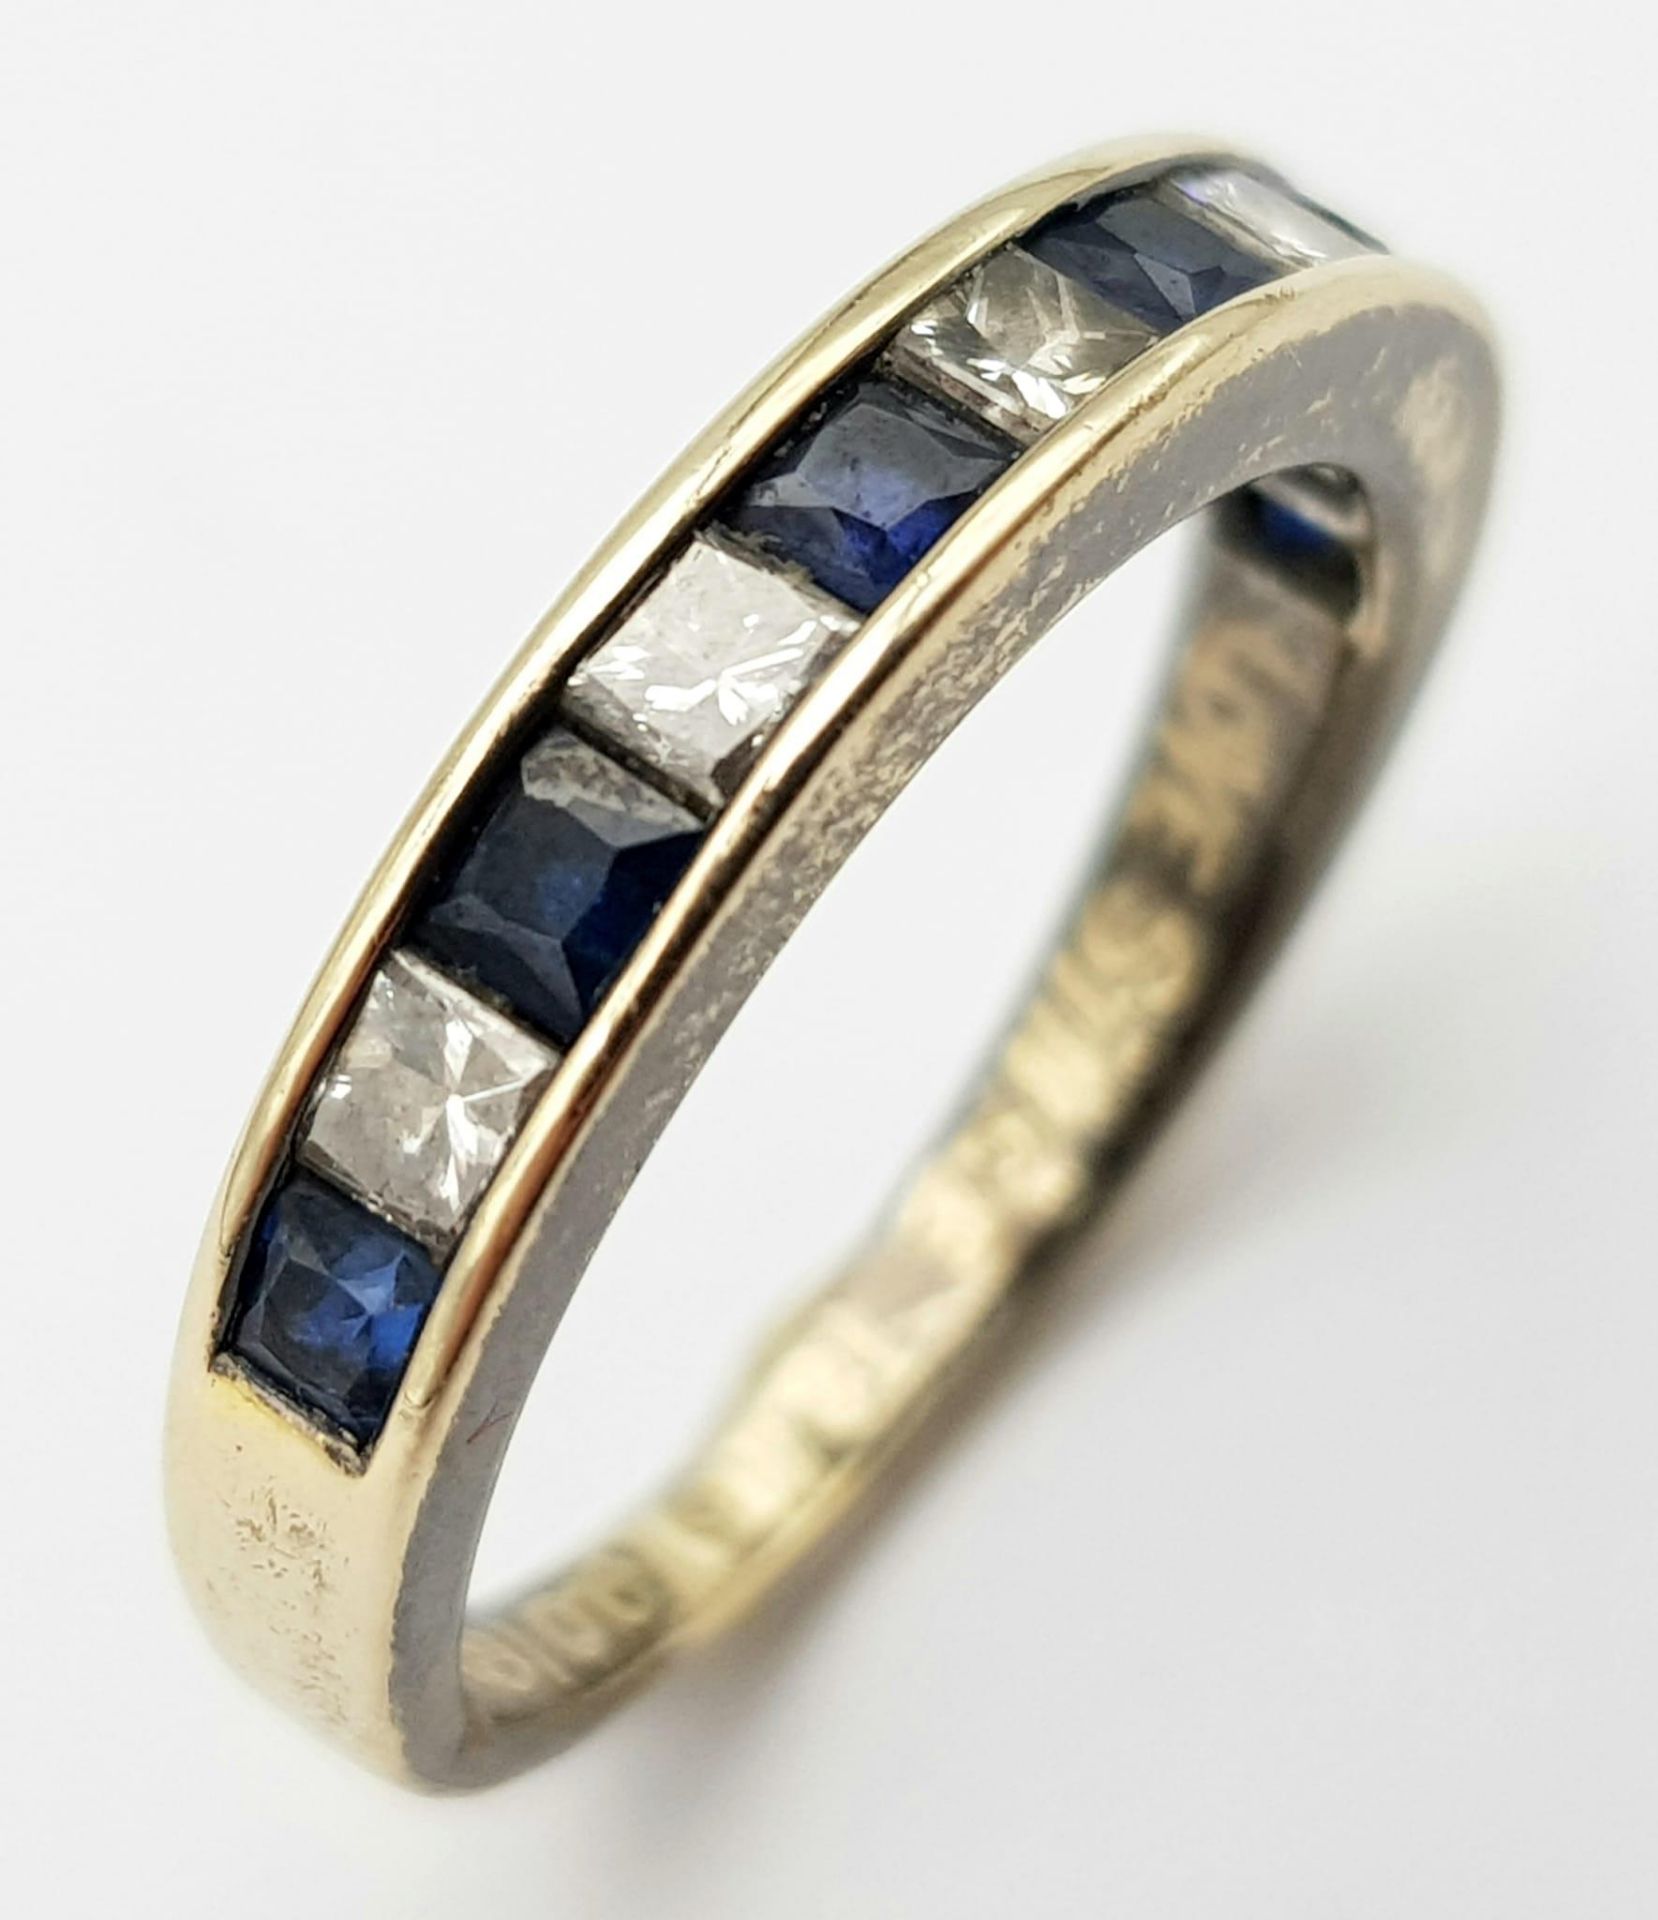 An 18K Gold Diamond and Sapphire Half-Eternity Ring. Size K. 3.1g total weight. Ref: 016637